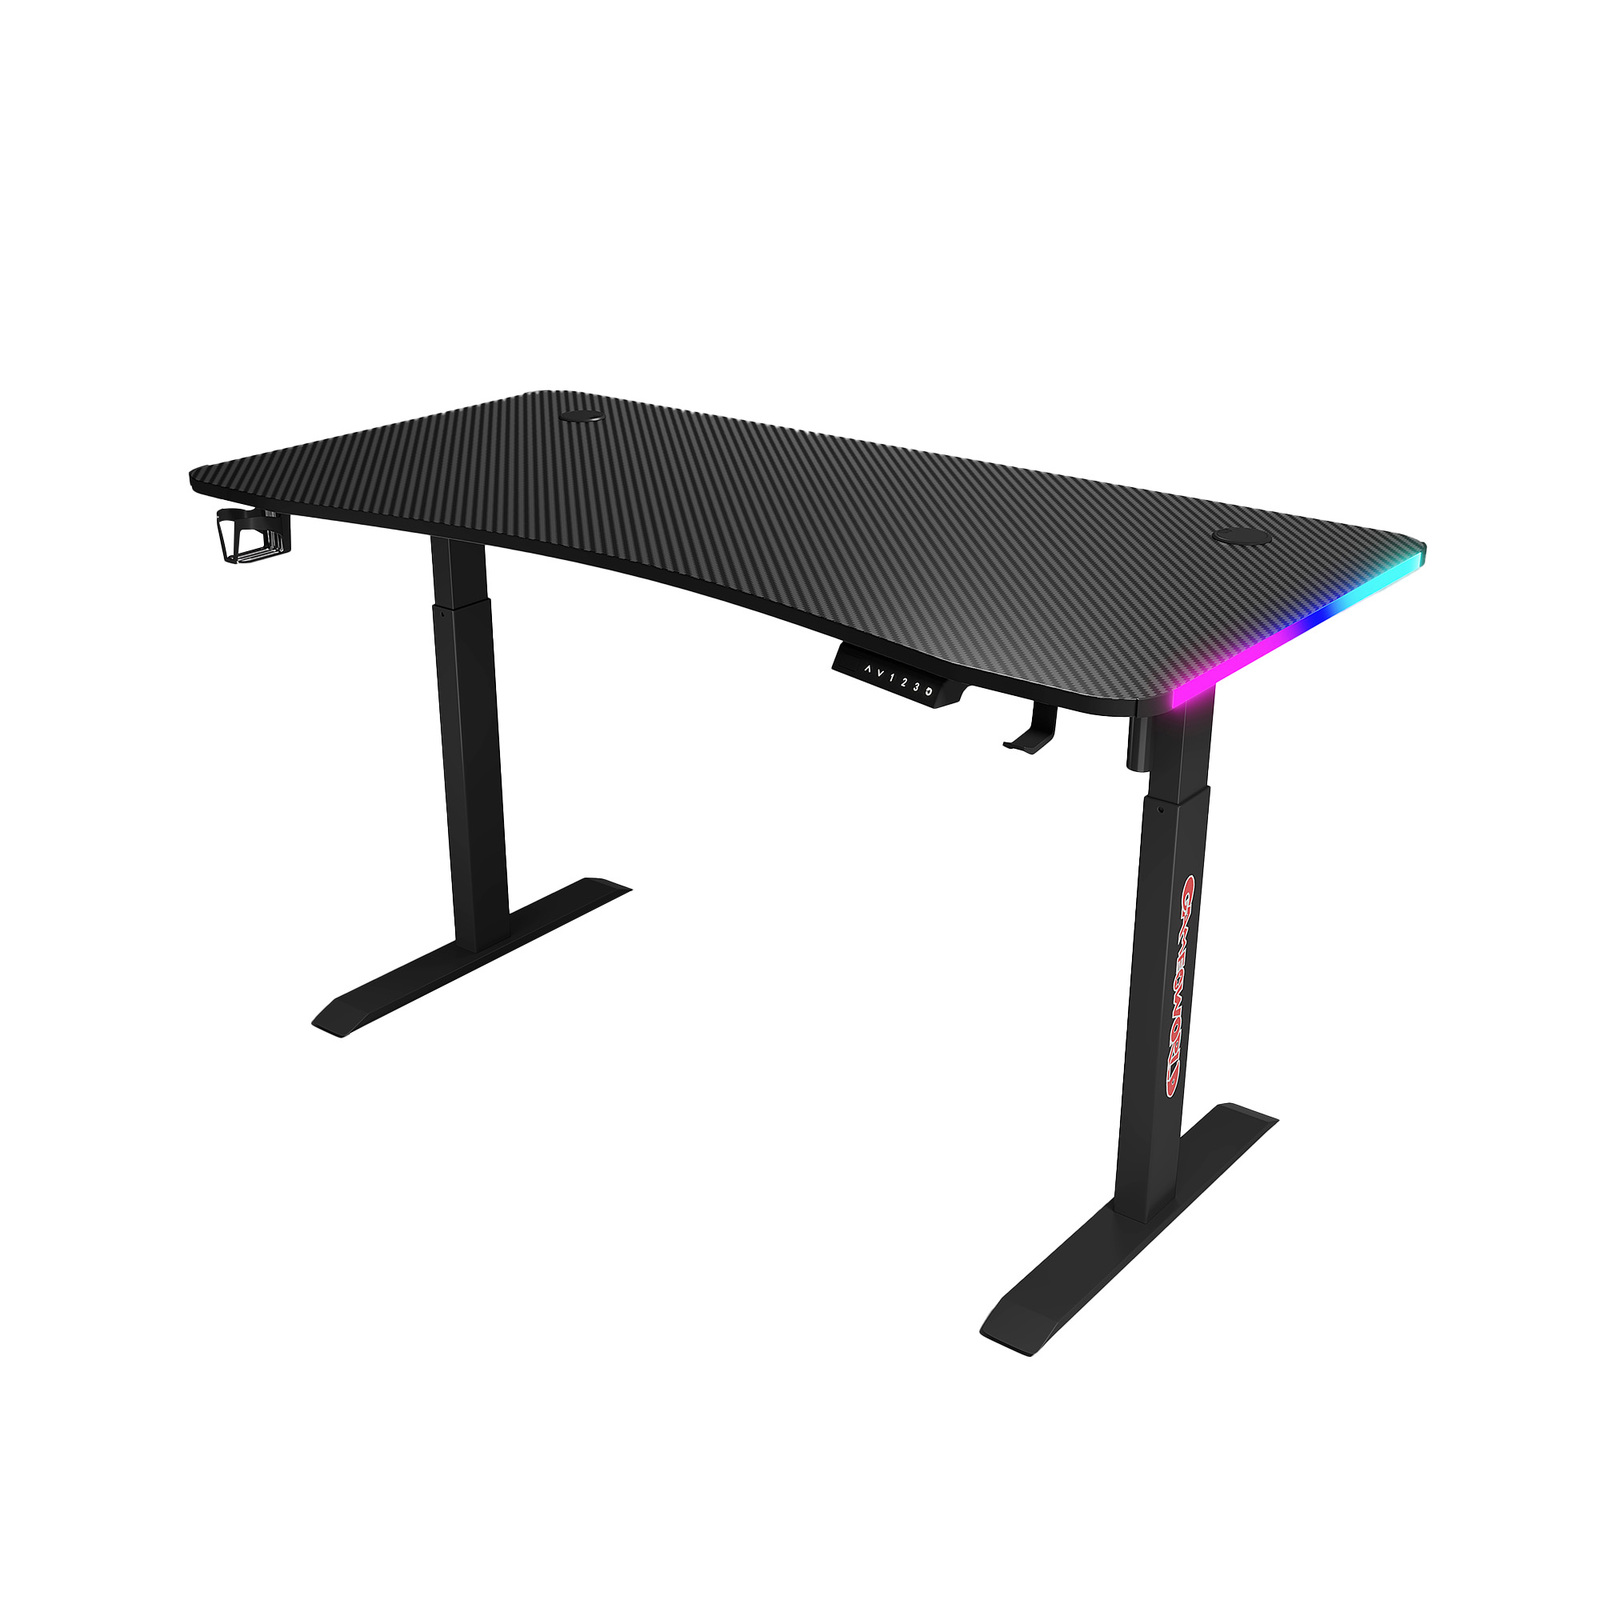 120cm RGB LED Gaming Desk Single Motor Frame Leg with Cup and Headphone Holder